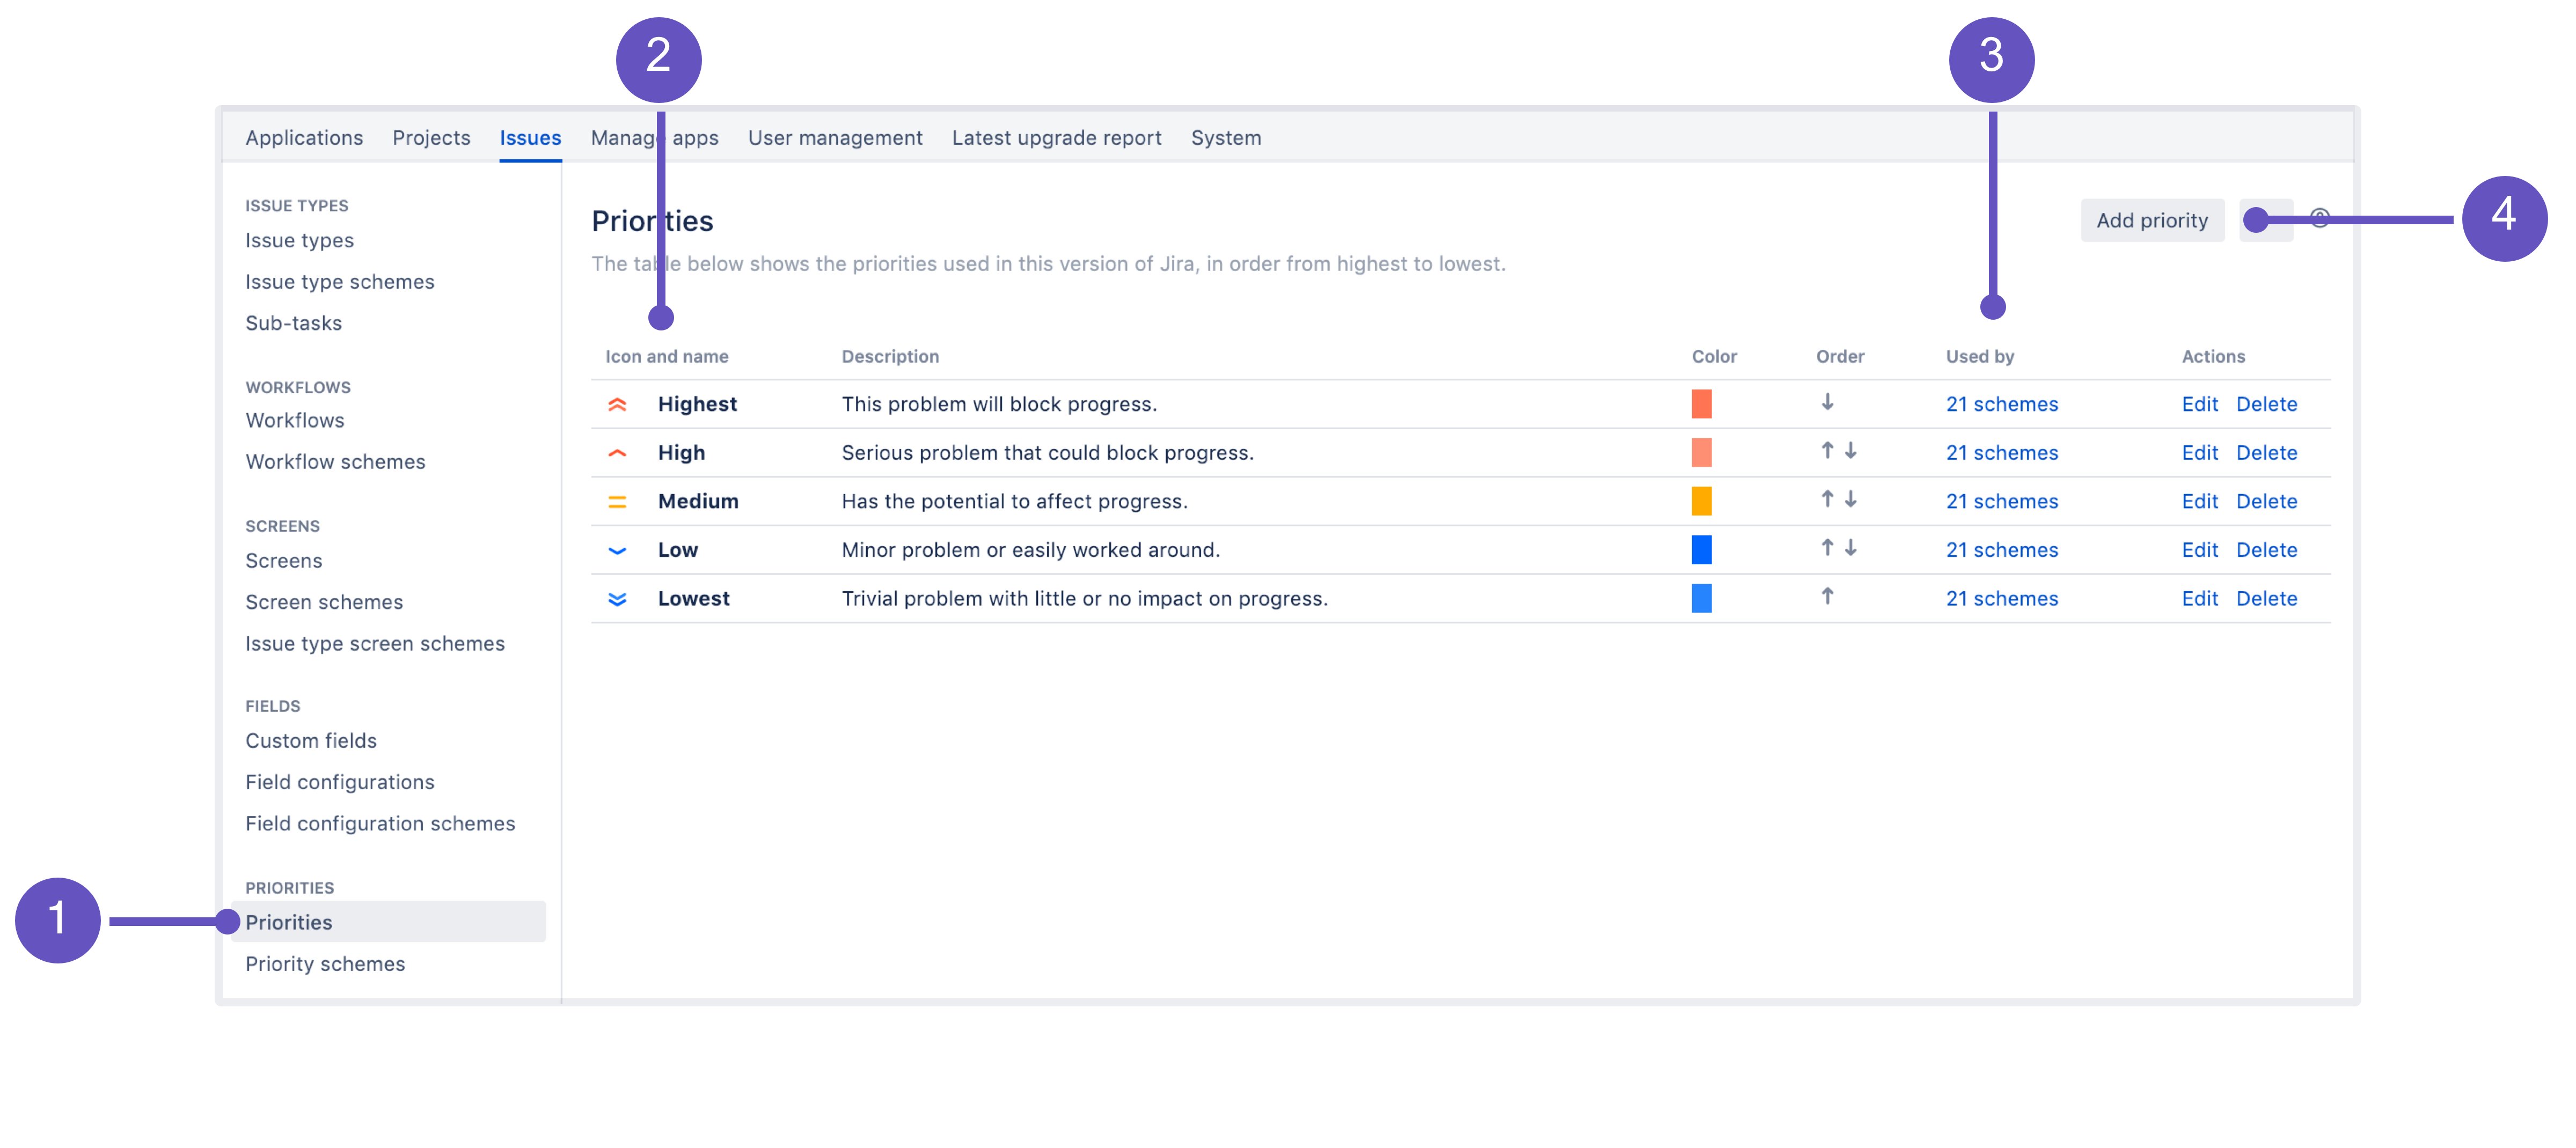 Priorities page in Jira admin console, with annotations explained below the image.